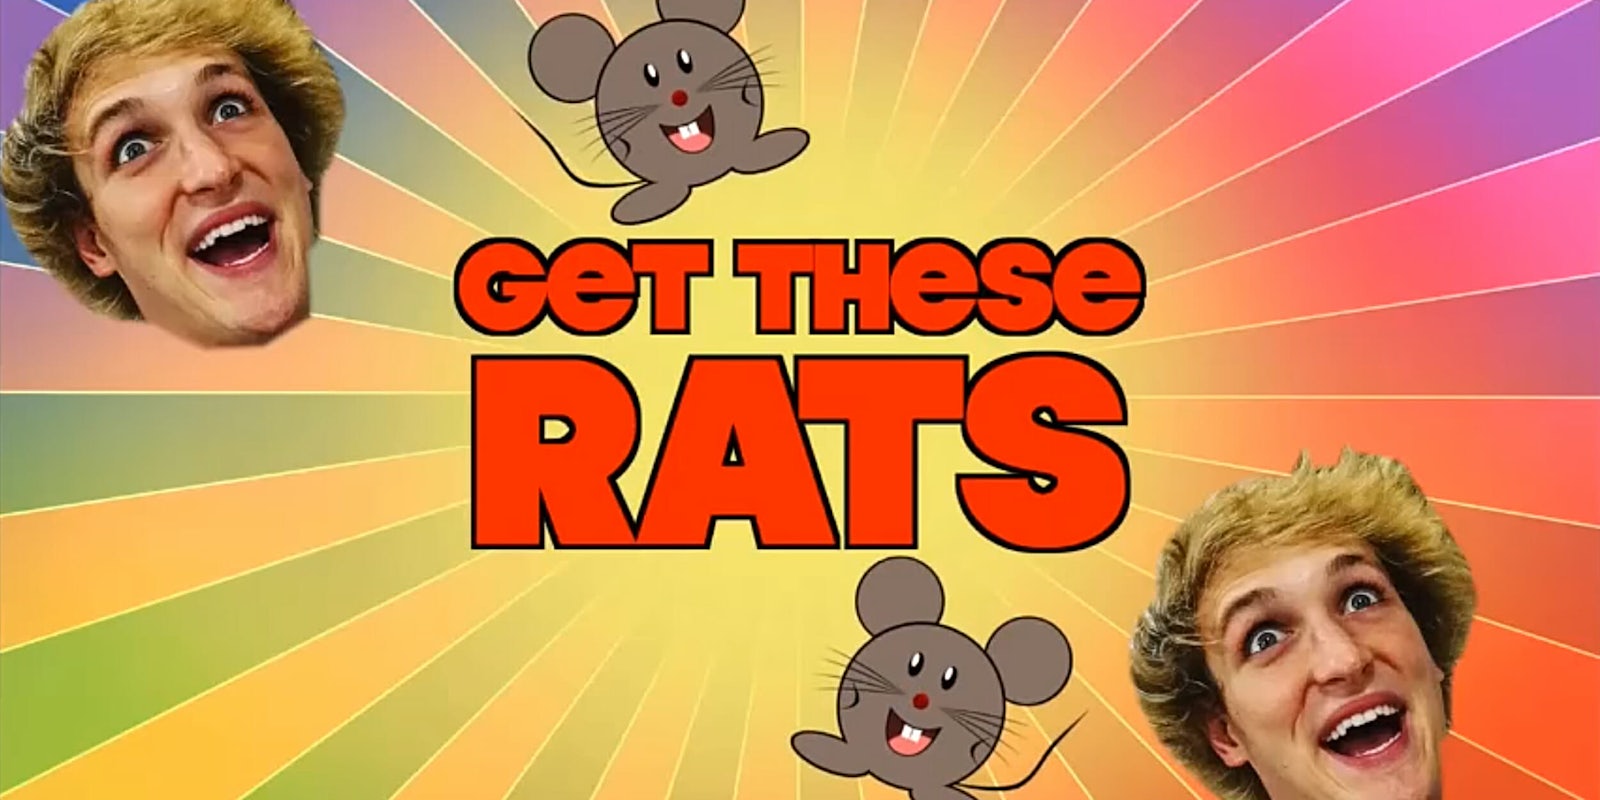 Logan Paul 'Get These Rats' title